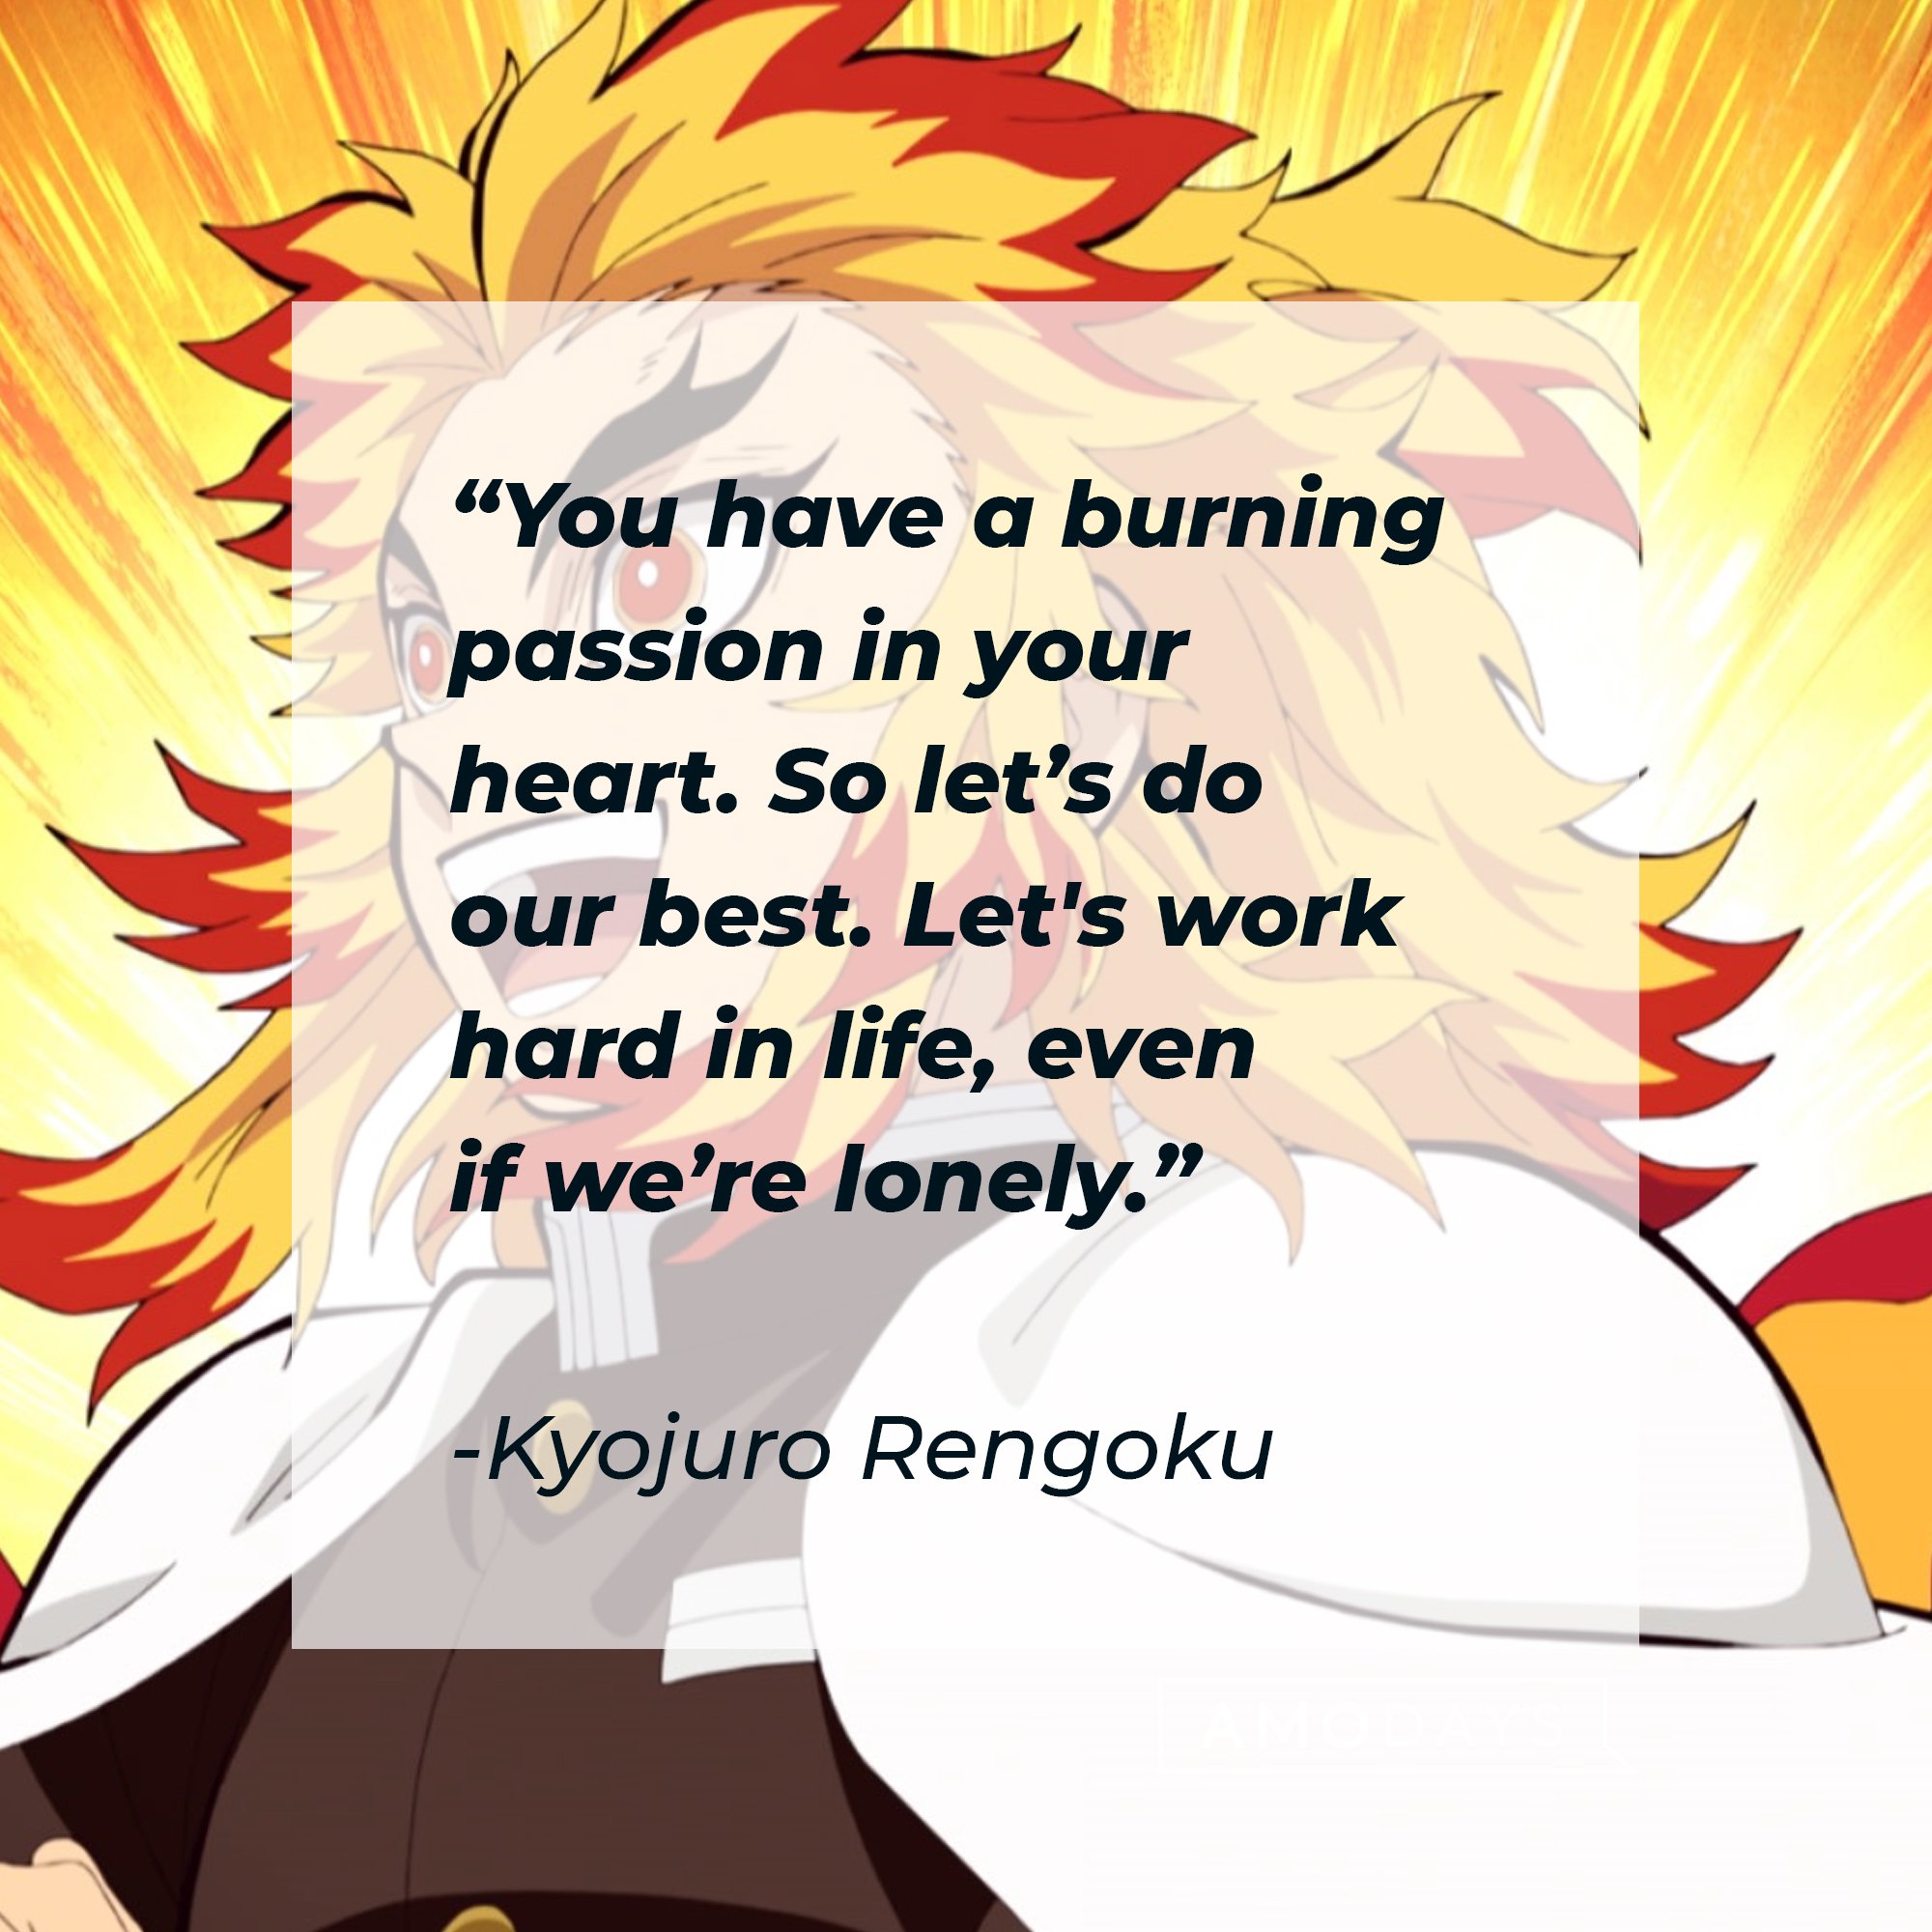 Kyojuro Rengoku’s quote: “You have a burning passion in your heart. So let’s do our best. Let's work hard in life, even if we’re lonely.” | Image: AmoDays